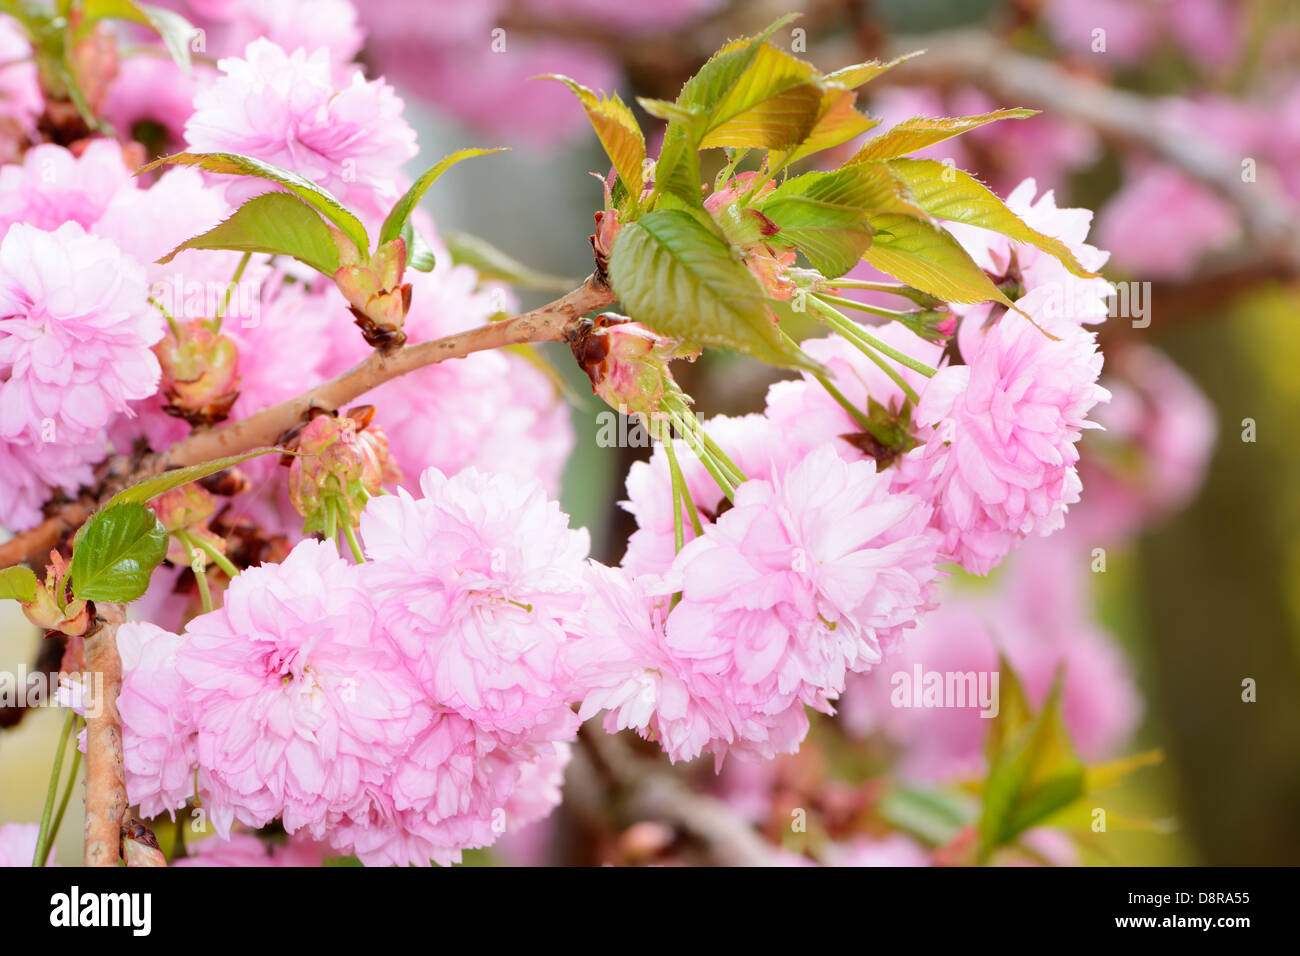 Twig with pink cherry blossoms Stock Photo